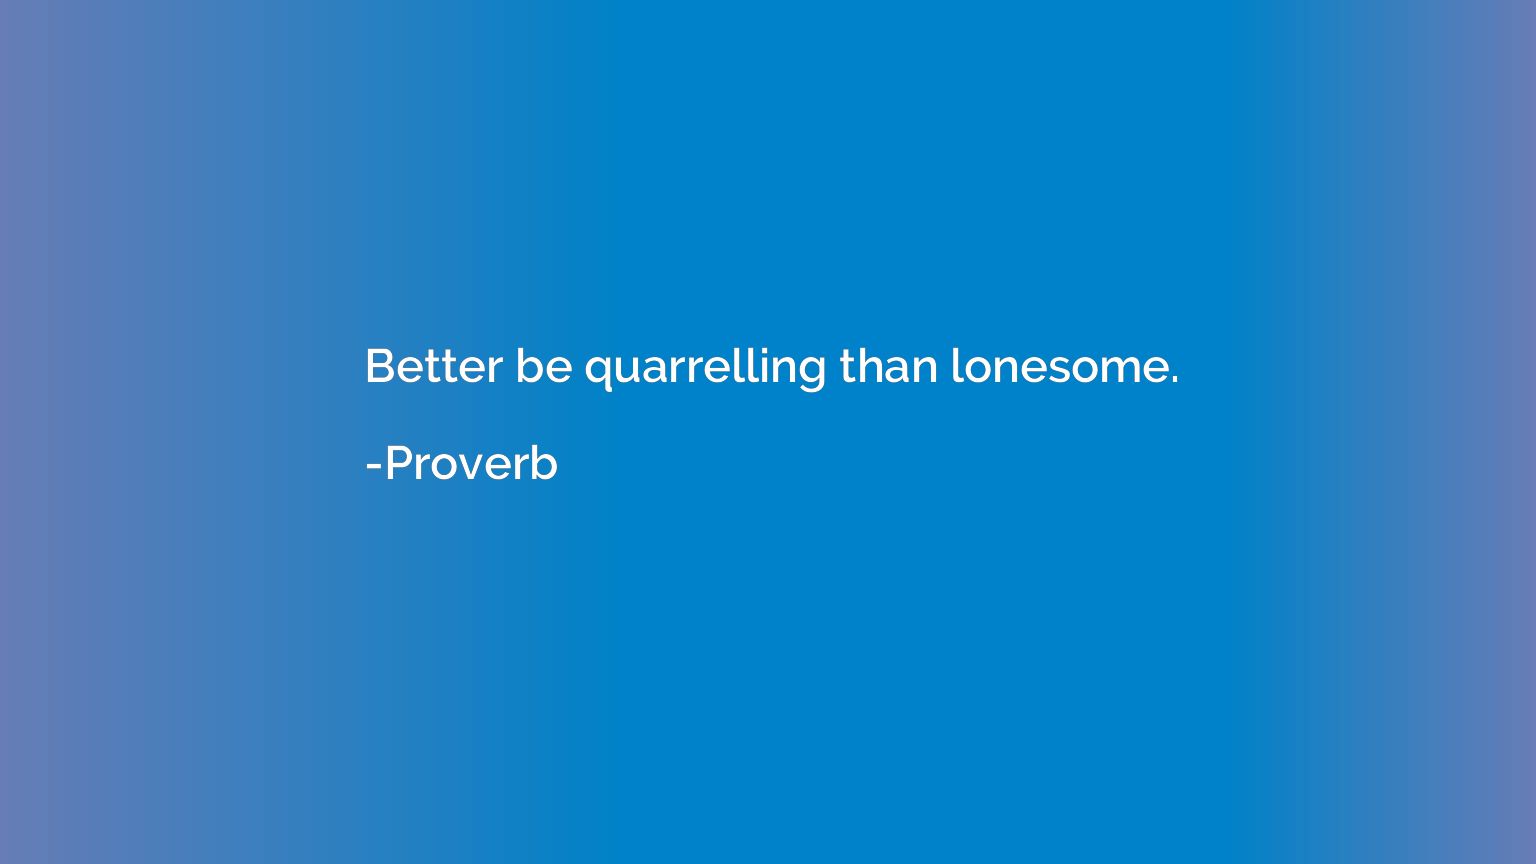 Better be quarrelling than lonesome.